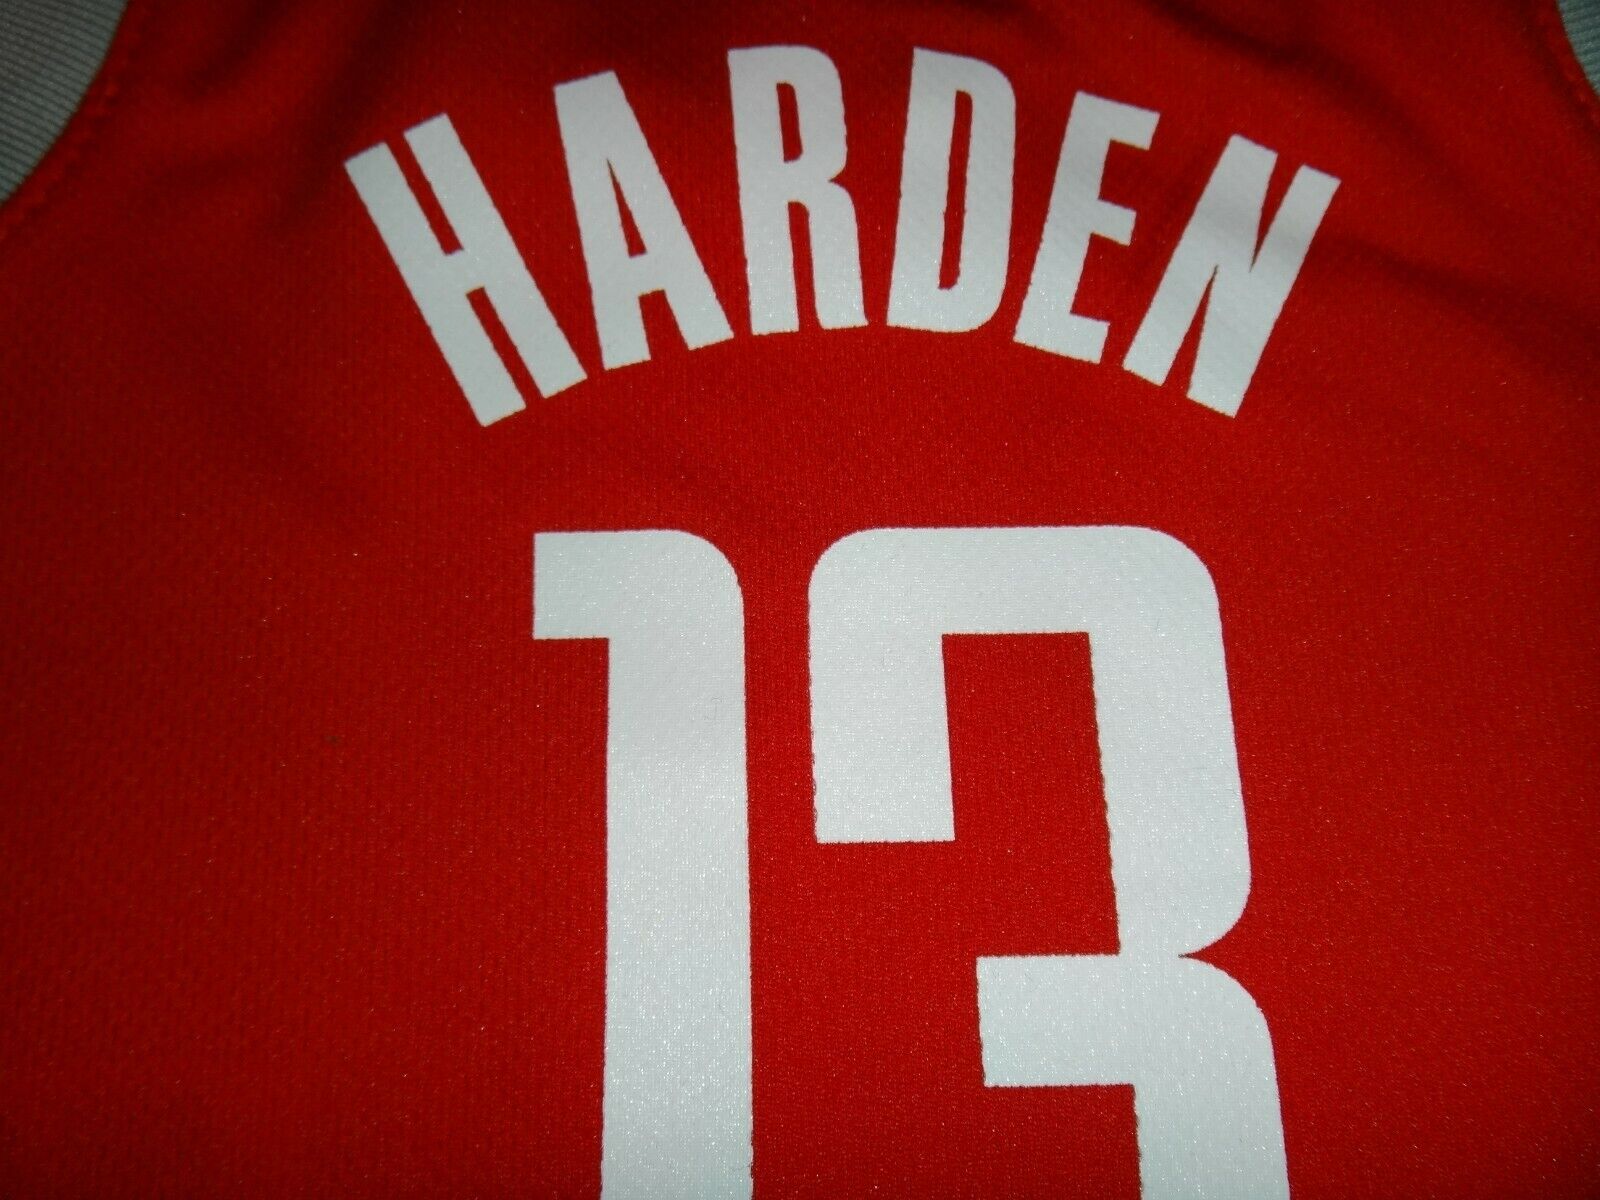 James Harden Houston Rockets Nike Infant 2020/21 Jersey - Icon Edition - Red